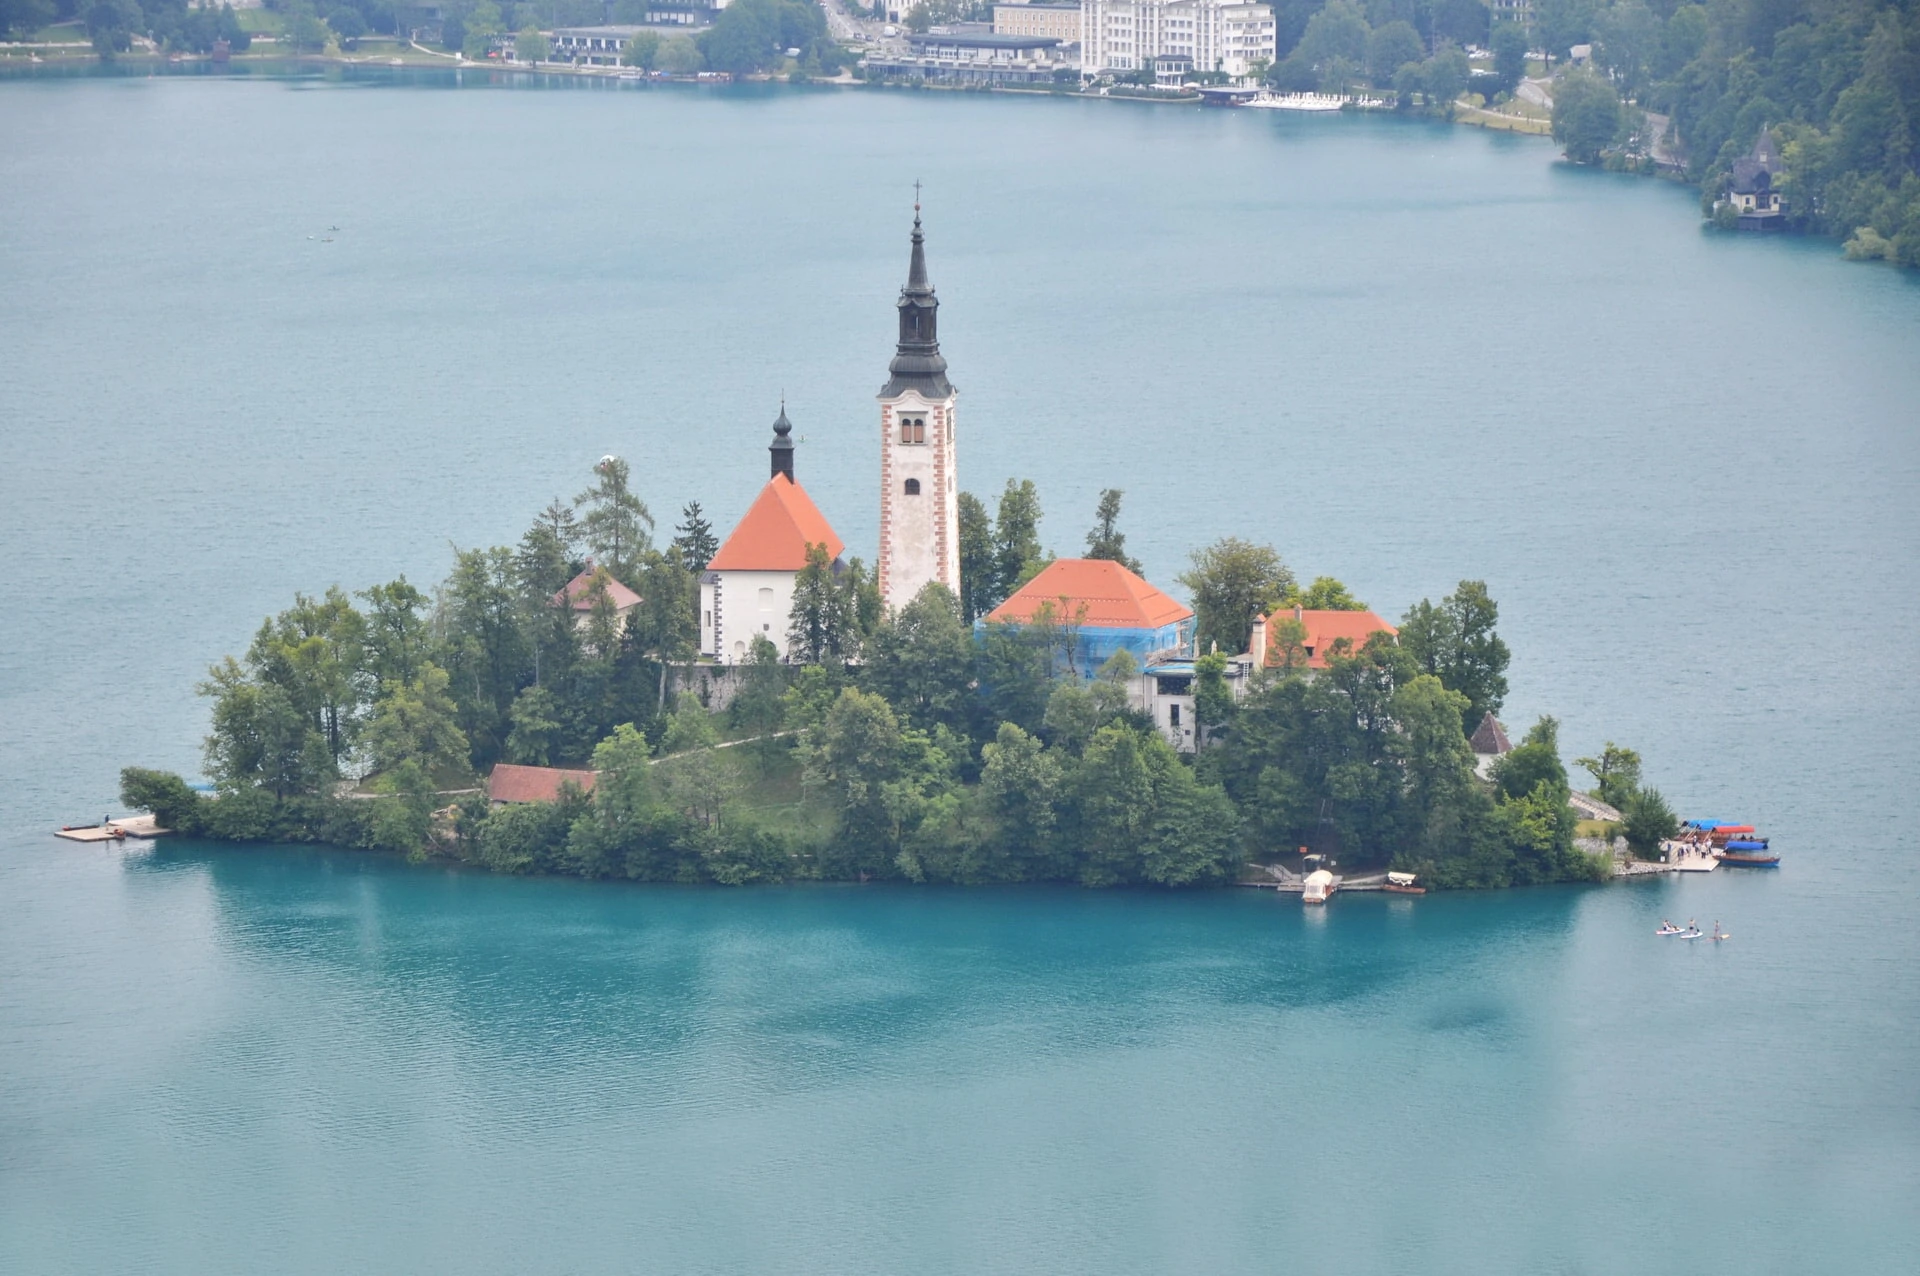 Bled Island, looking from the Ojstrica viewpoint